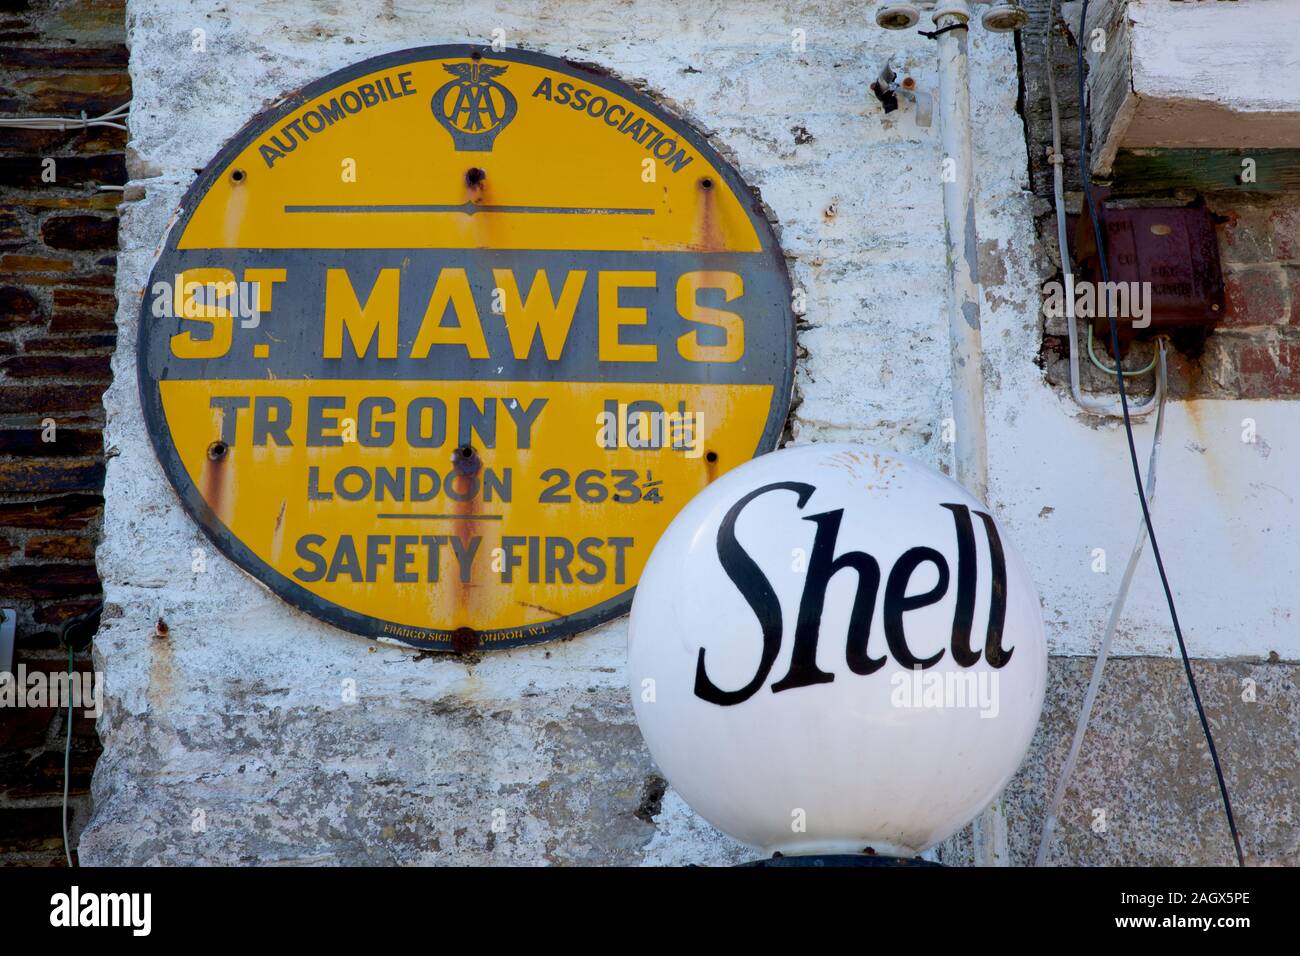 Classic old-fashioned Shell petrol pump and and enamel AA sign at St Mawes, Cornwall, United Kingdom Stock Photo